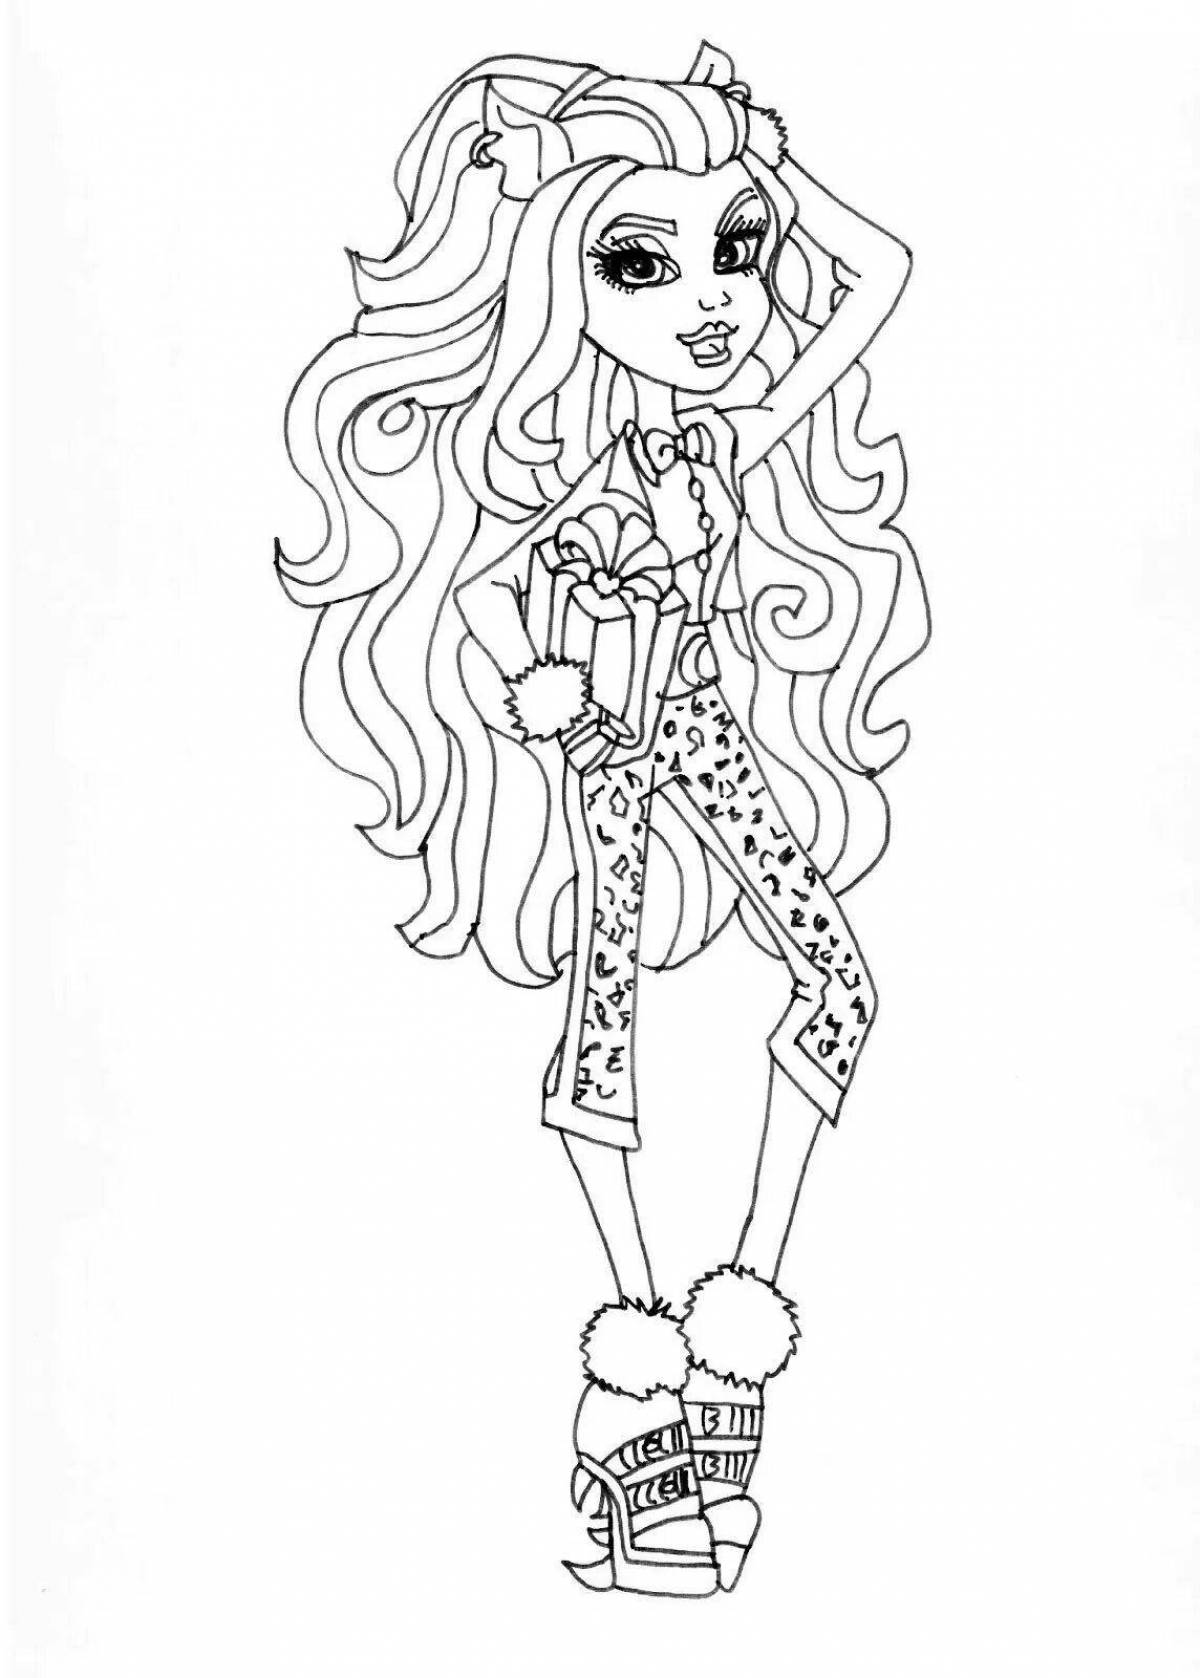 Monster high incredible coloring book